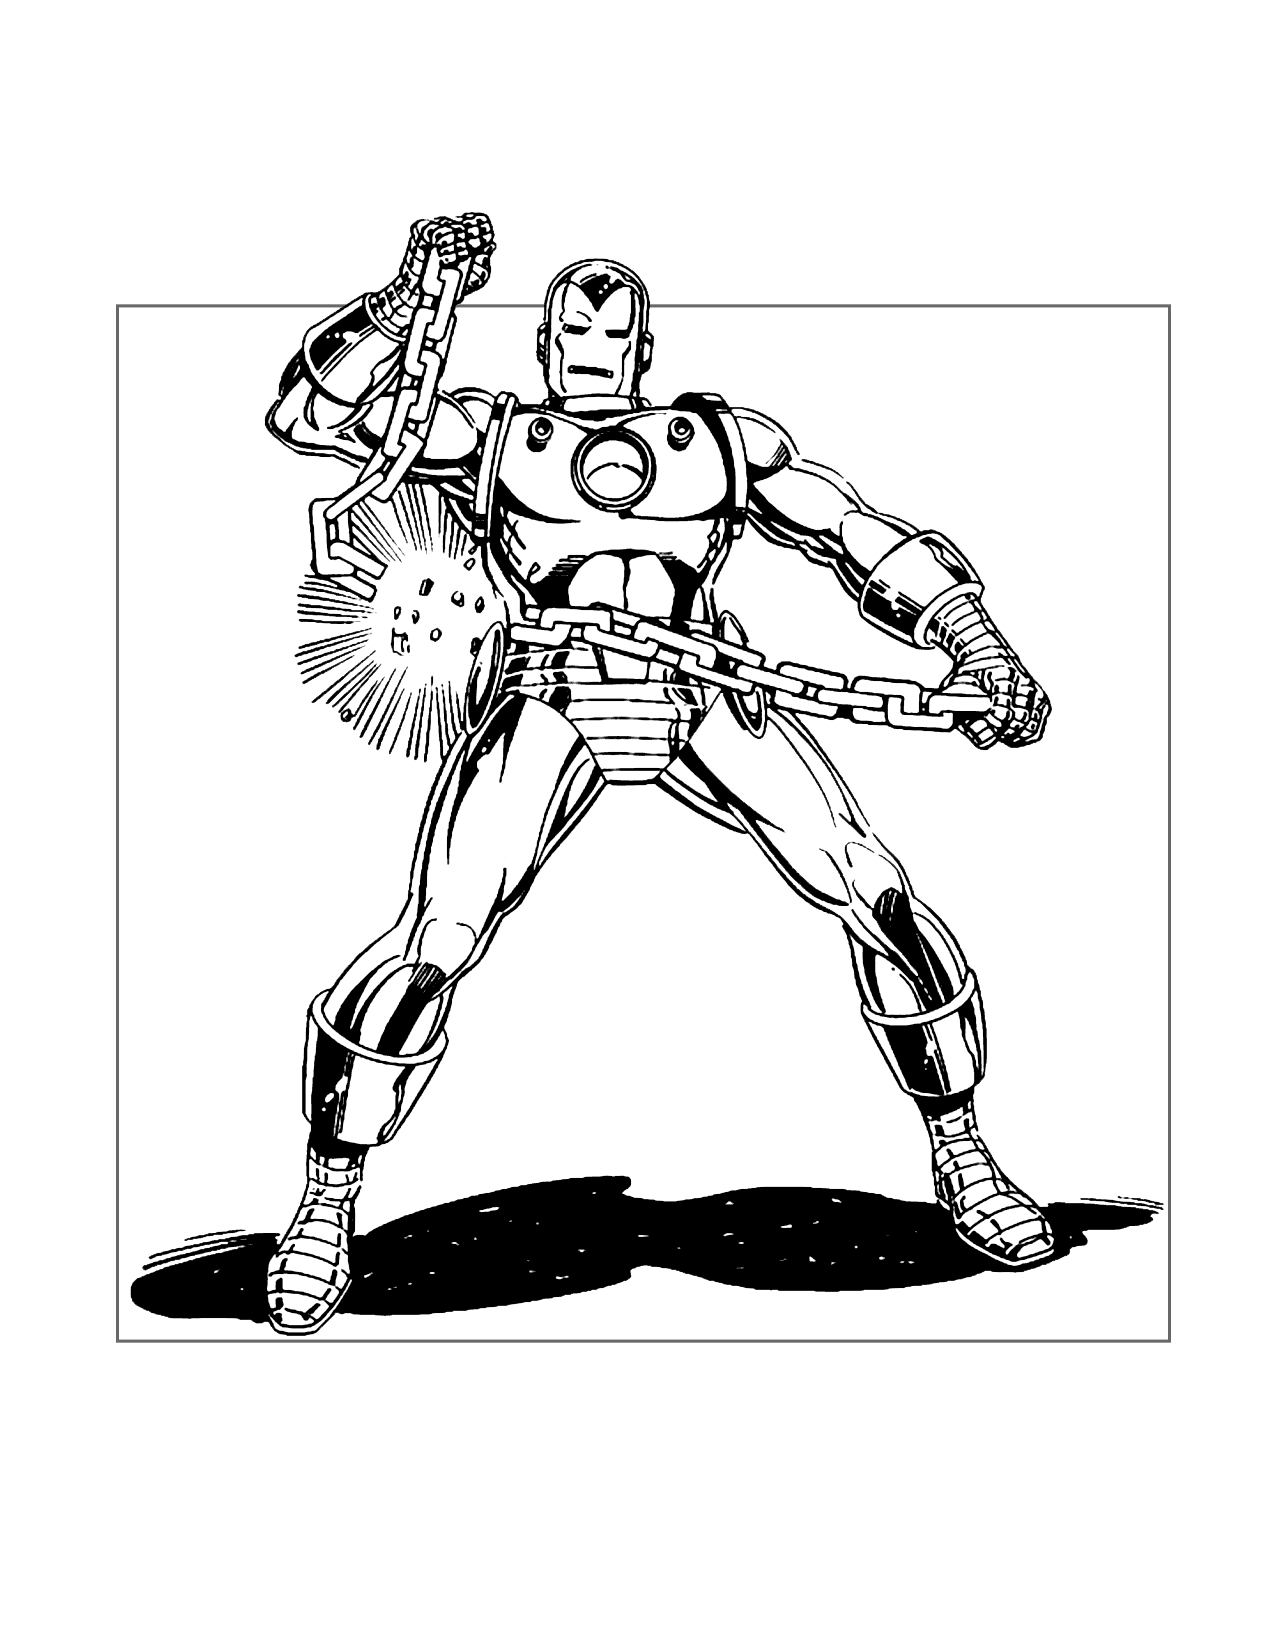 Iron Man Breaking Chains Coloring Page